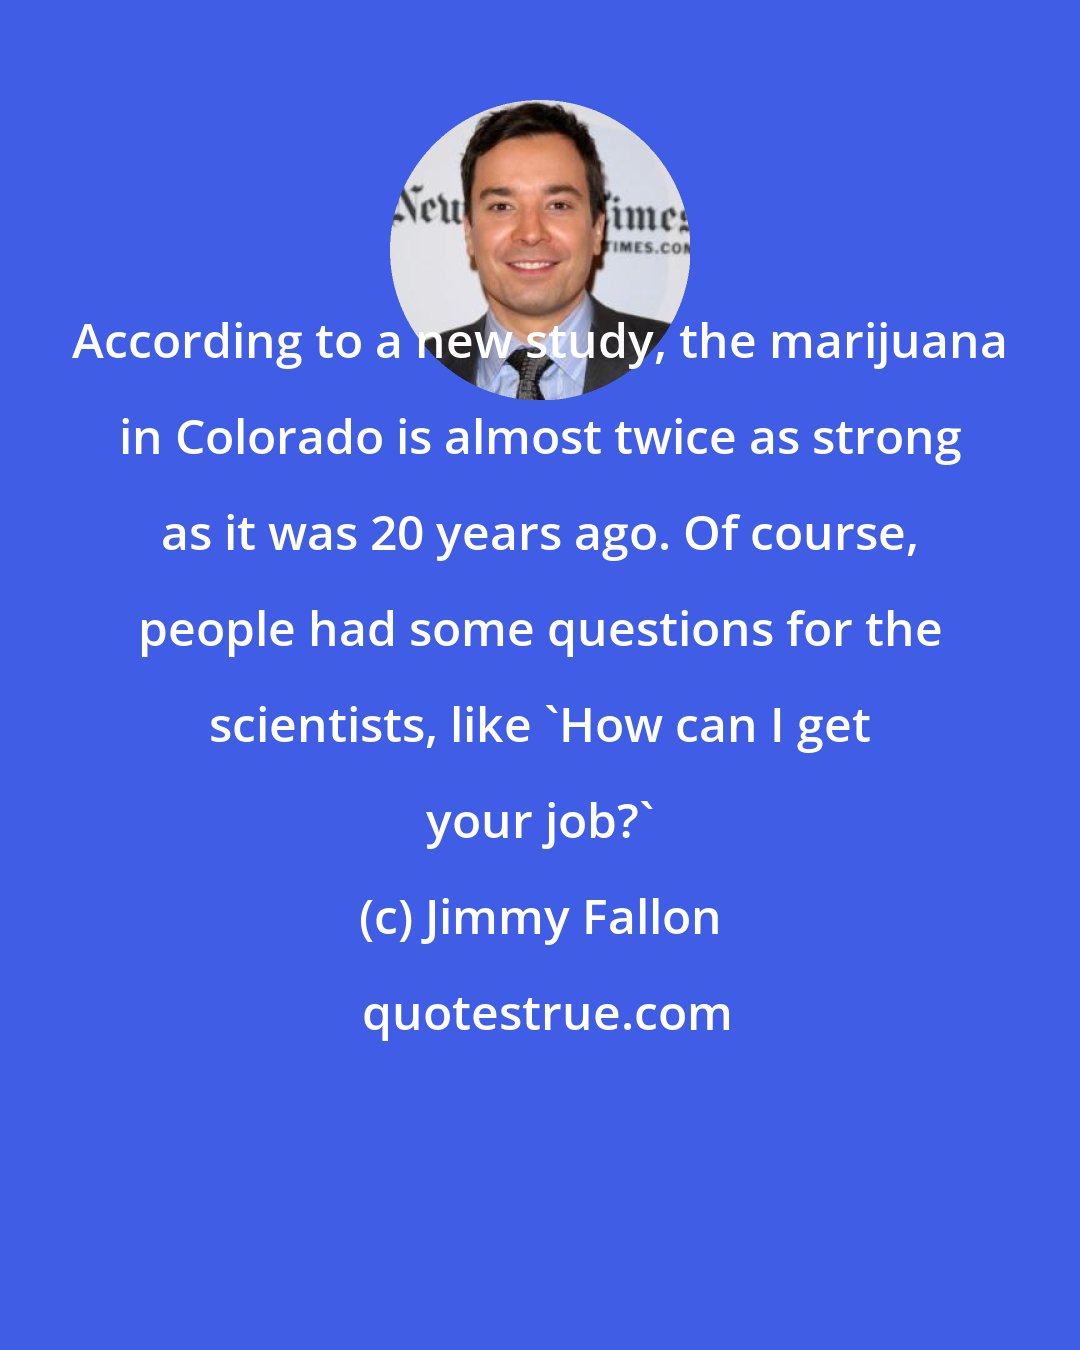 Jimmy Fallon: According to a new study, the marijuana in Colorado is almost twice as strong as it was 20 years ago. Of course, people had some questions for the scientists, like 'How can I get your job?'